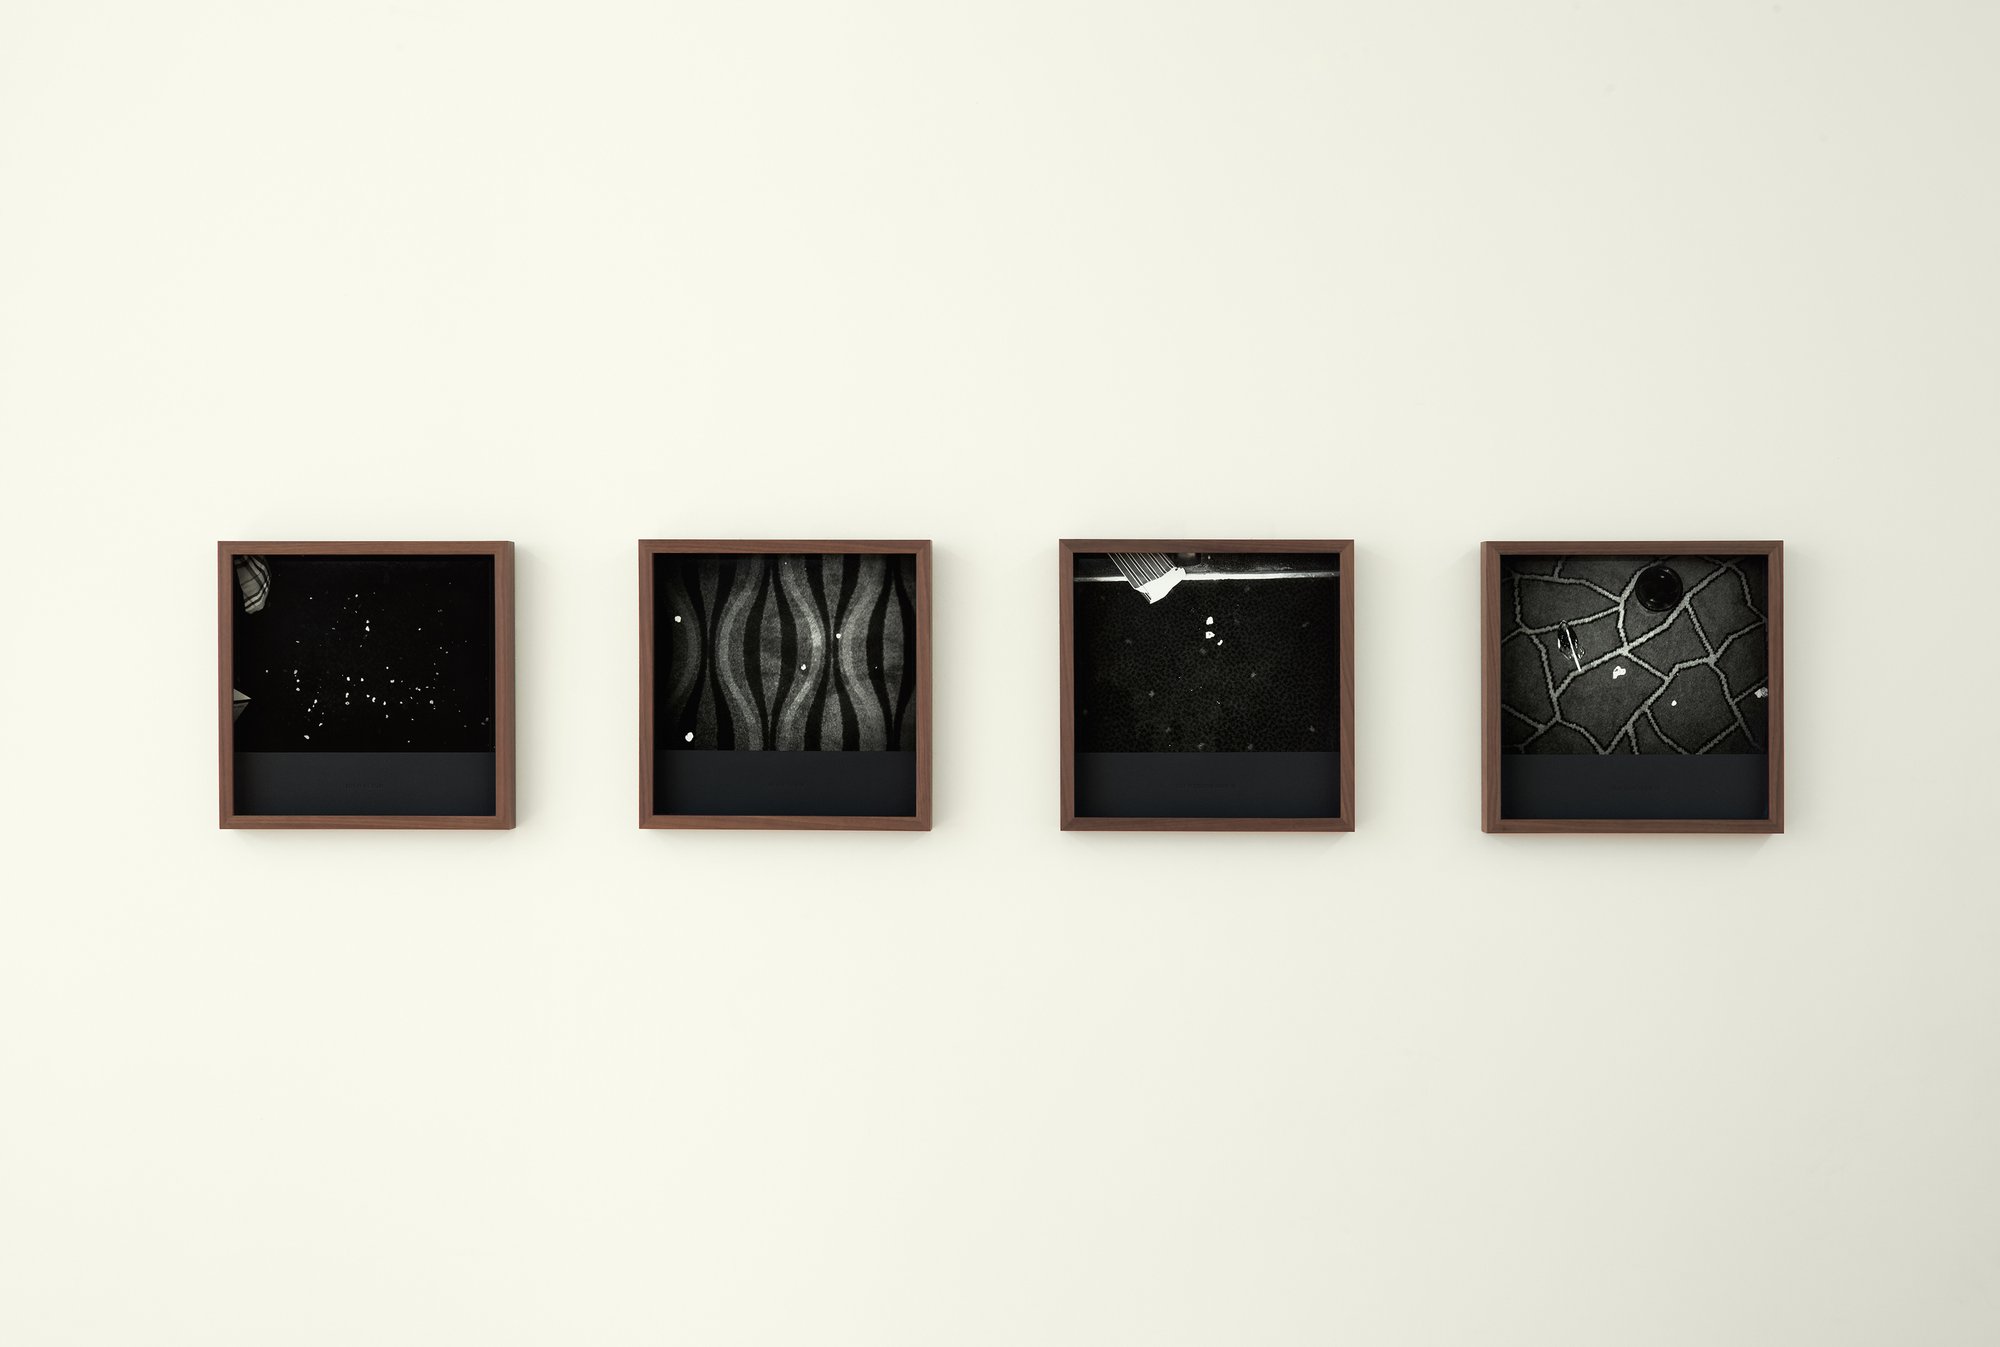 Mark Aerial Waller, Popcorn Casts, framed monochrome photographic prints, 27.1 x 20.5 cm each (10 5/8 x 8 1/8 in each), 2011 – 2012